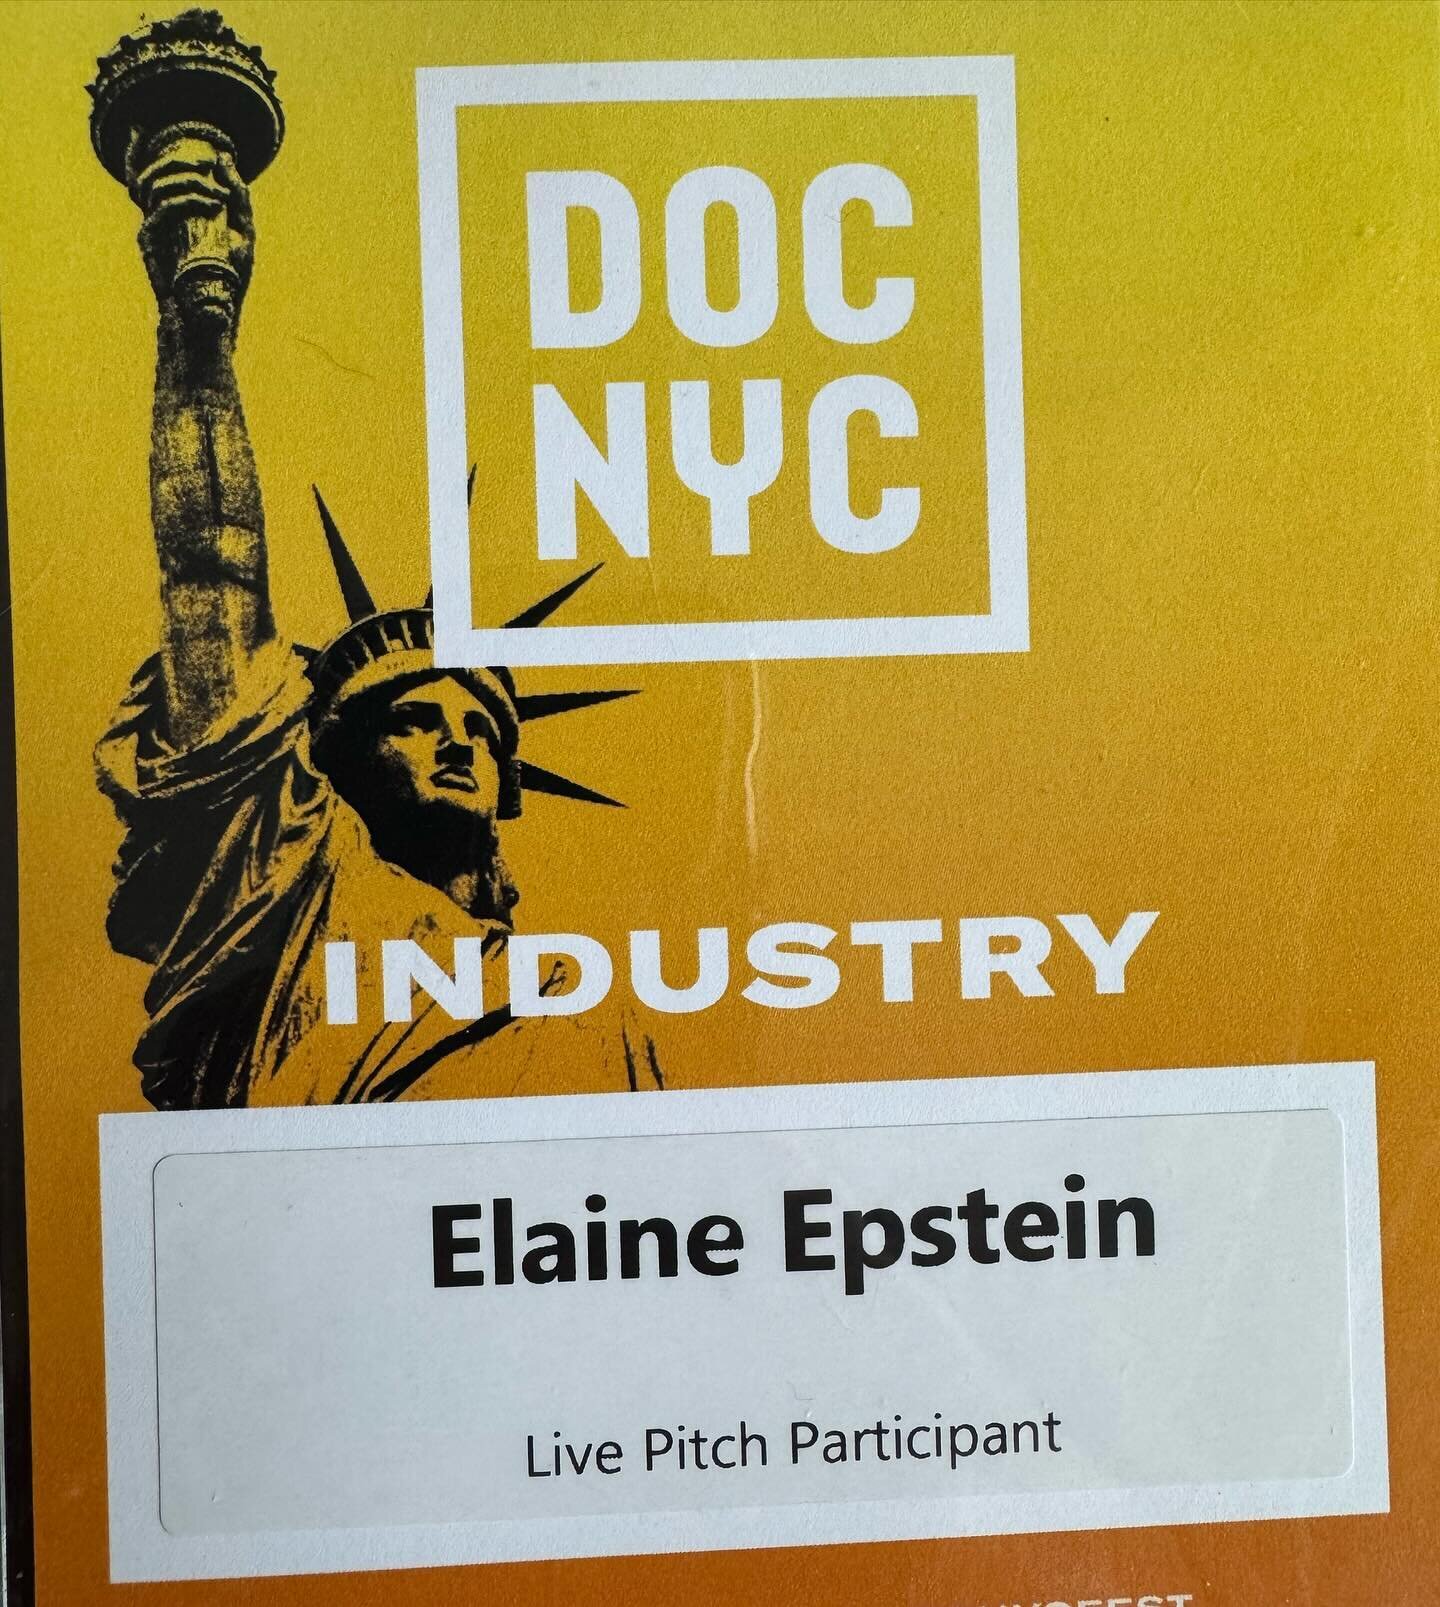 Honored to be selected to pitch our doc feature at Doc NYC yesterday among the most amazing group of filmmakers and films.